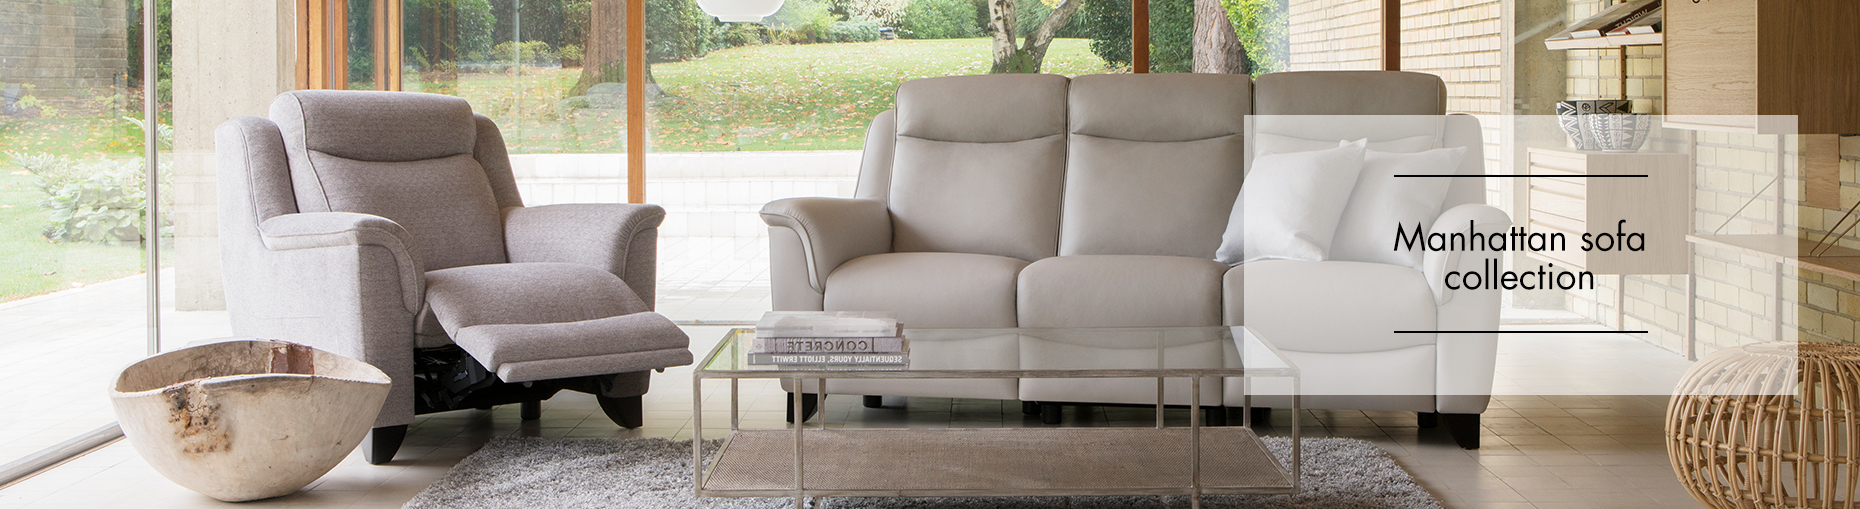 Manhattan Sofa collection by Parker Knoll at Forrest Furnishing